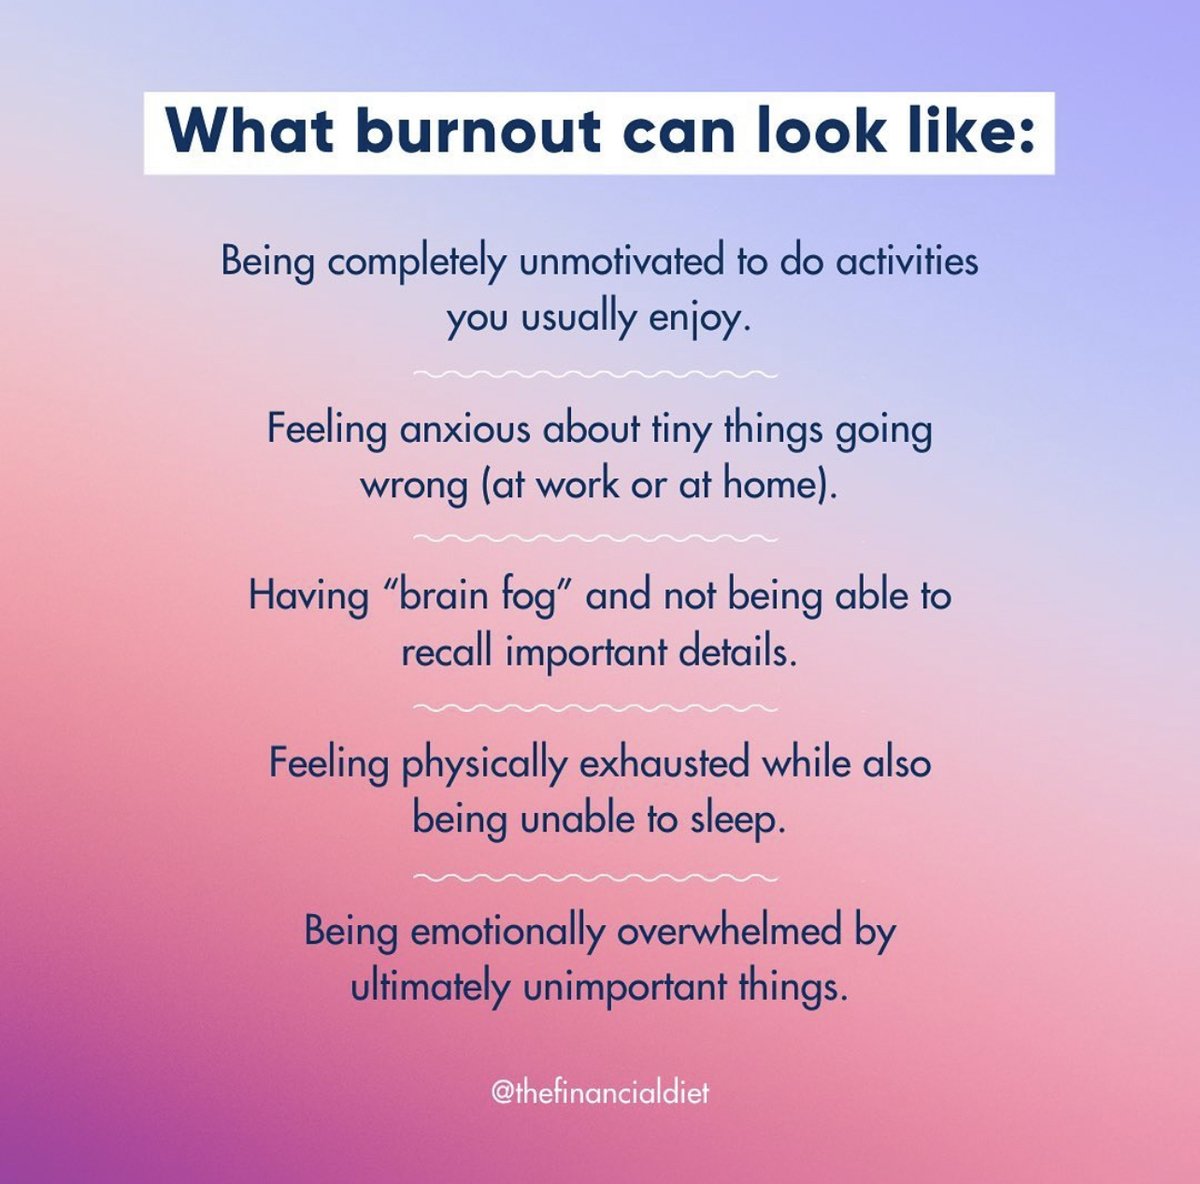 It's easy to get wrapped up in work and experience burnout, it is so important to allow yourself to relax and have experiences unrelated to work and responsibilities. Remember work is NOT everything, take care of yourself, stay motivated and stay positive. #CSWGTLHLeon